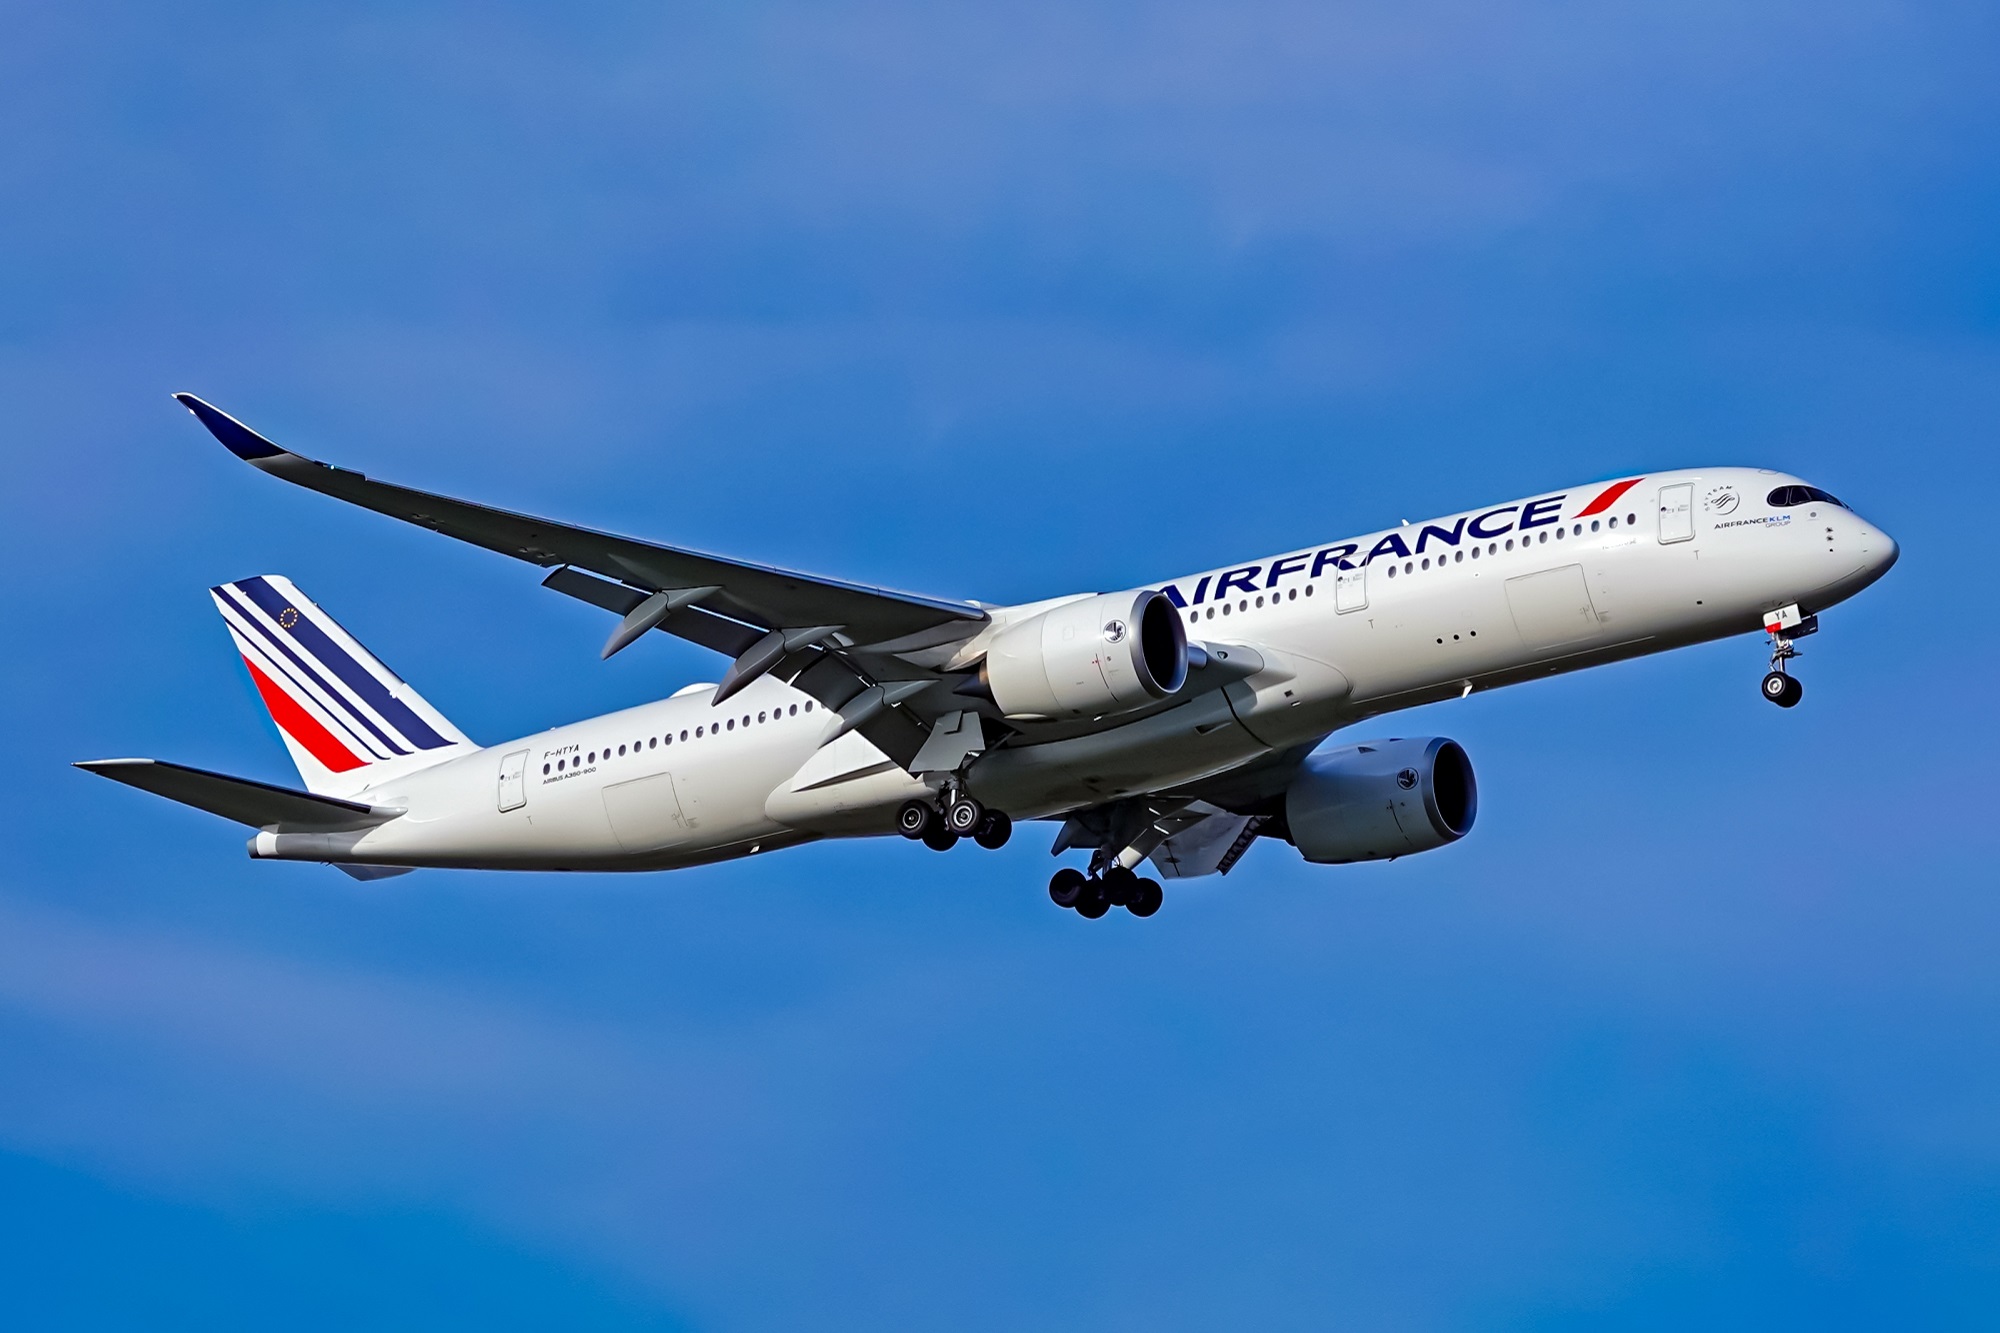 The oldest and newest aircraft in the Air France fleet